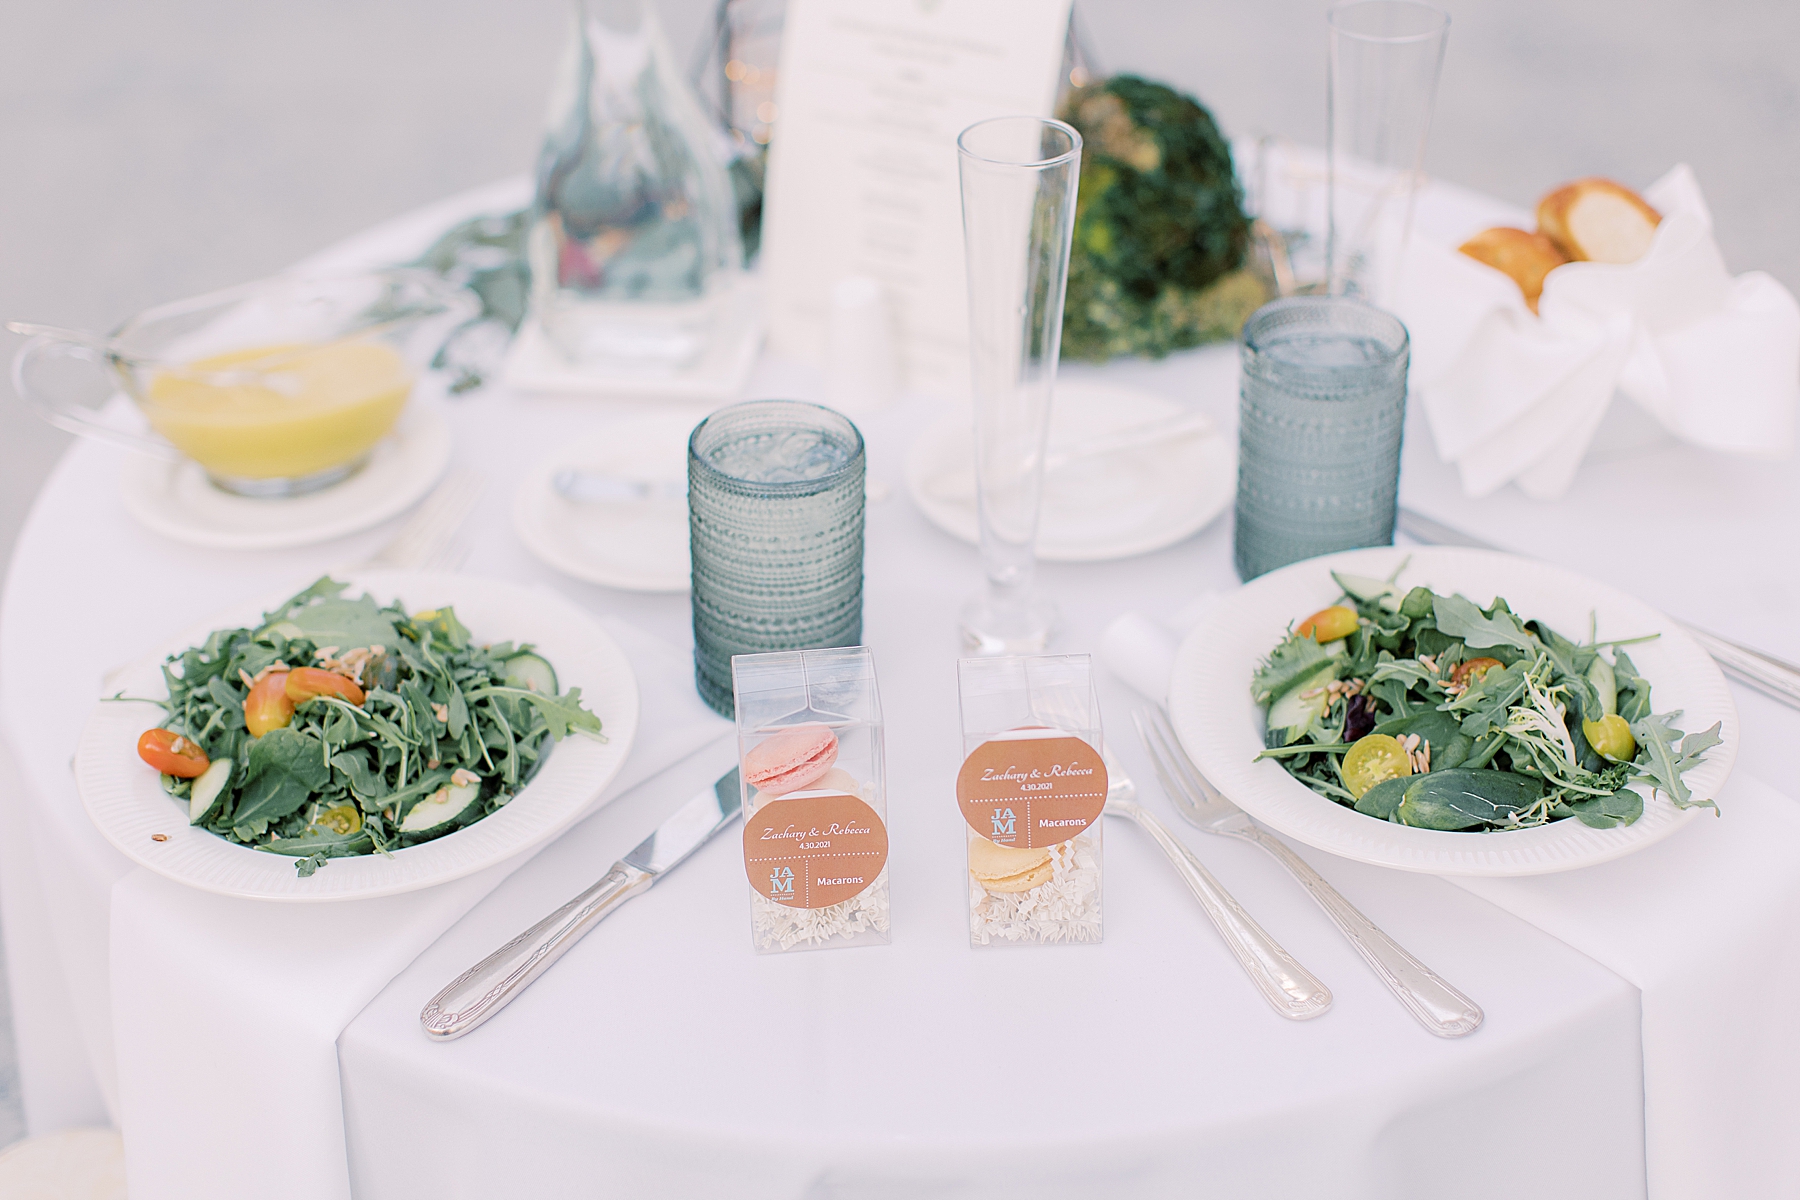 place setting with salads and macron favors for Bellevue Hall wedding reception